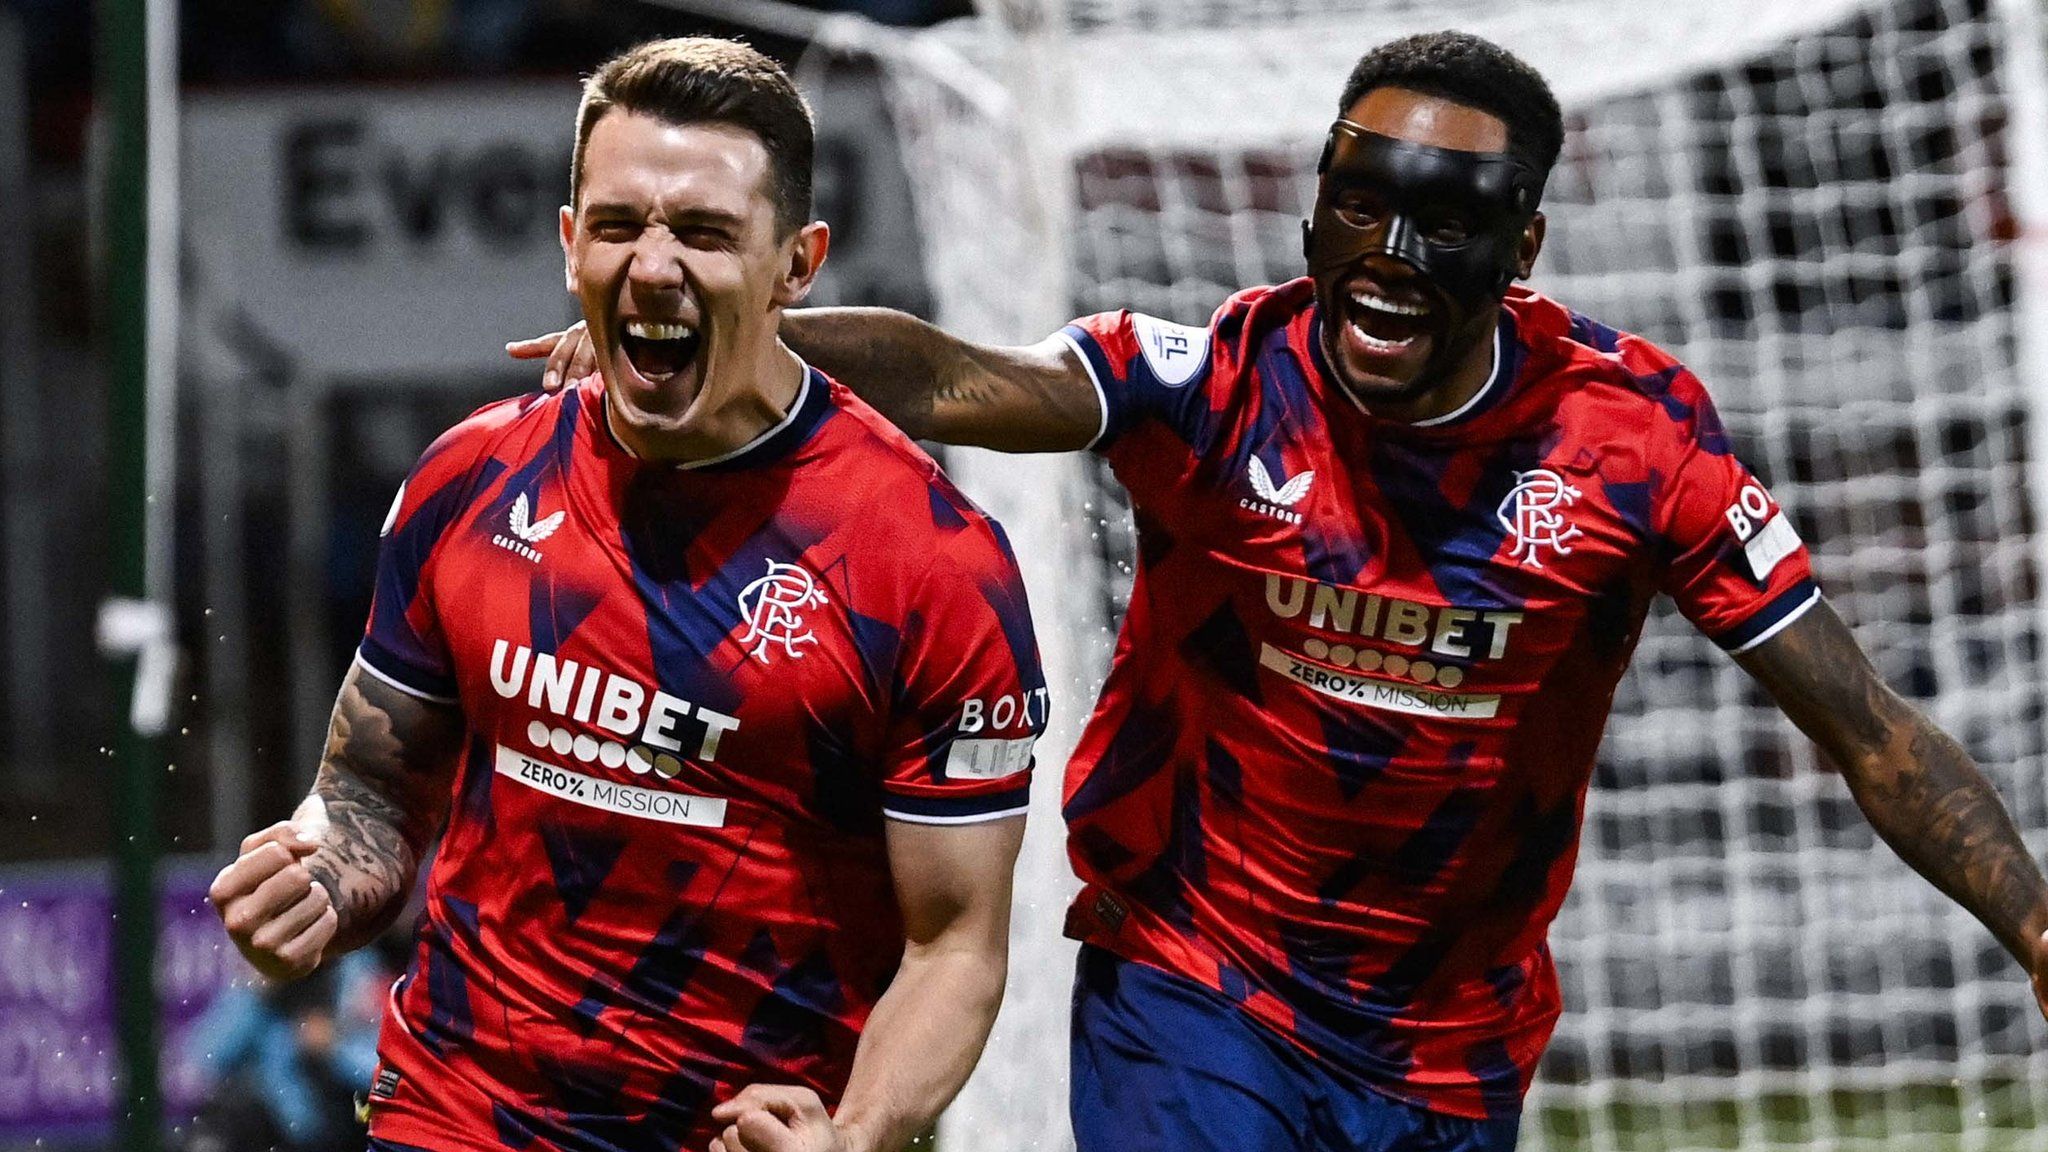 Rangers' Ryan Jack celebrates with Danilo after scoring to make it 1-0 during a cinch Premiership match between Dundee FC and Rangers at The Scot Foam Stadium at Dens Park